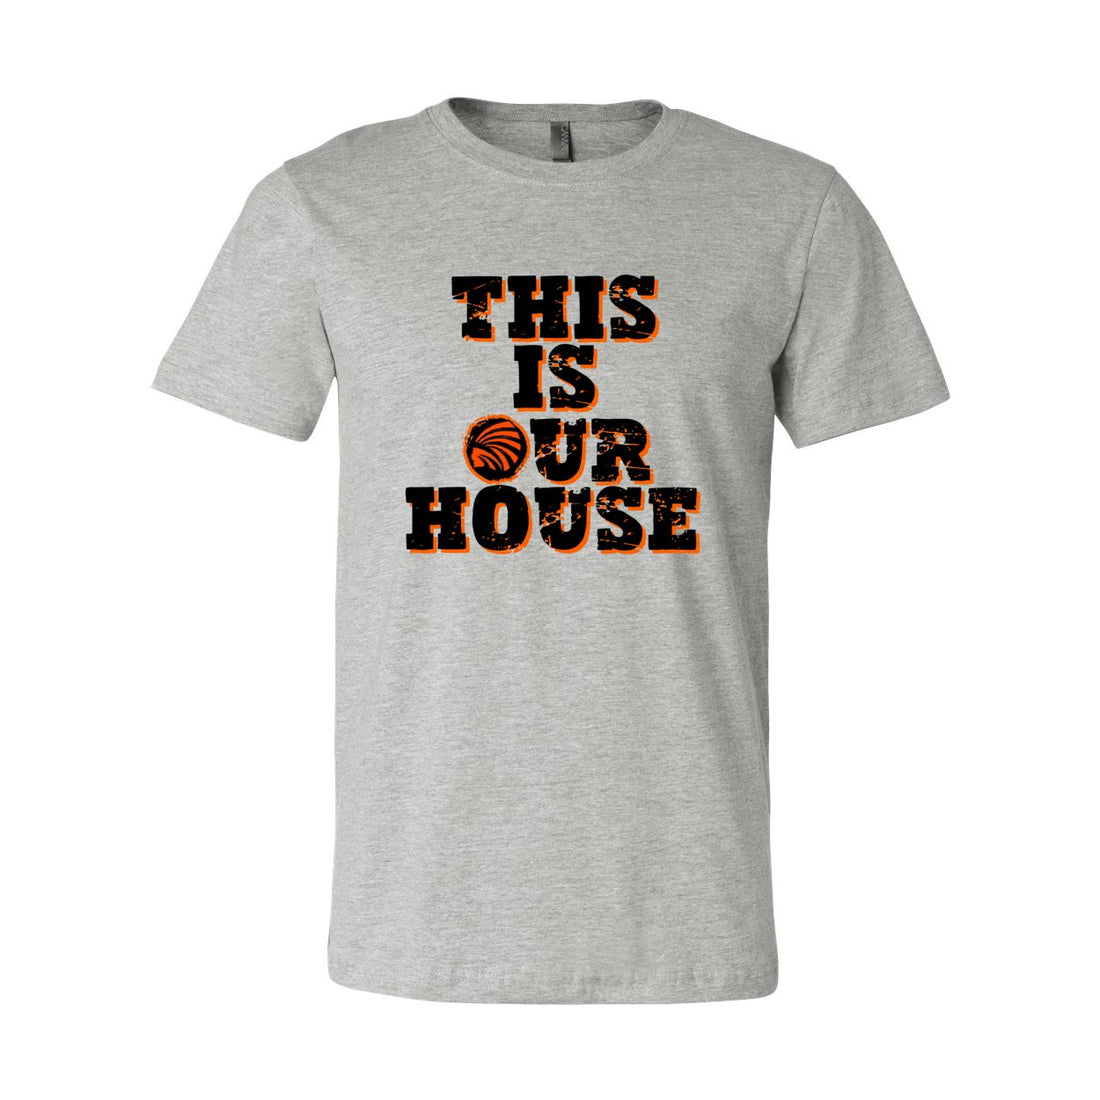 Our House Indians Short Sleeve Jersey Tee - T-Shirts - Positively Sassy - Our House Indians Short Sleeve Jersey Tee